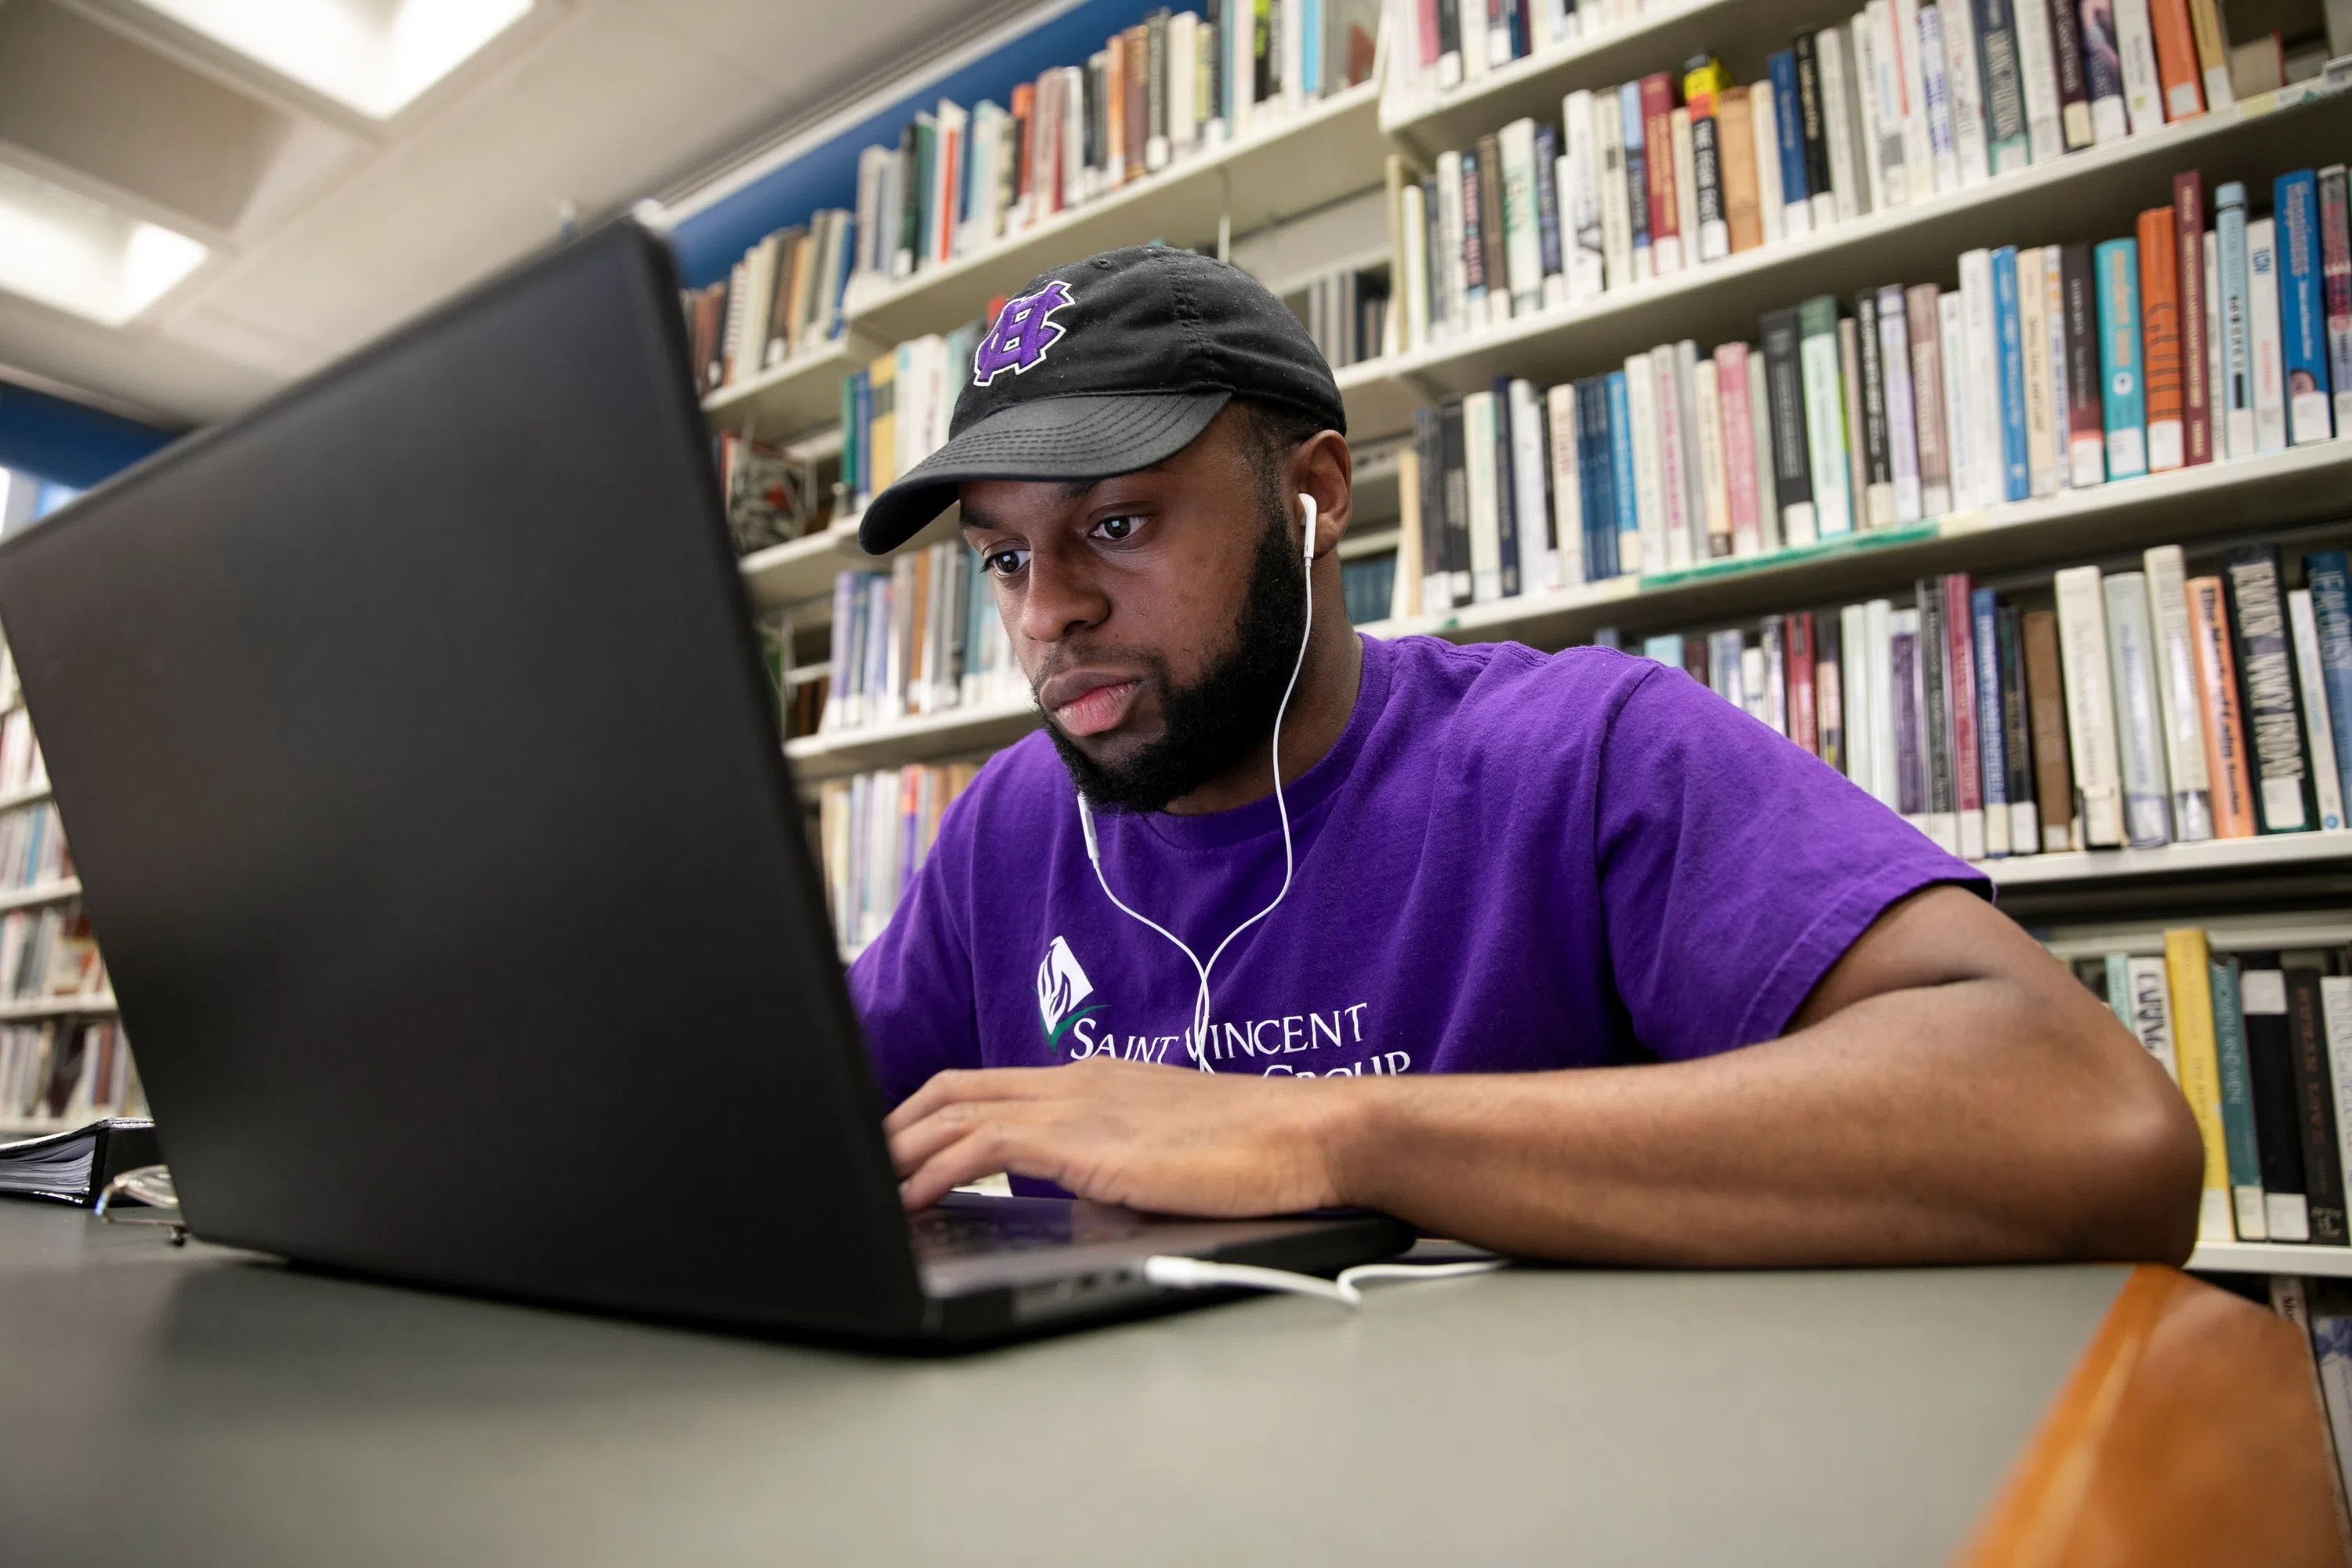 student working on laptop at library